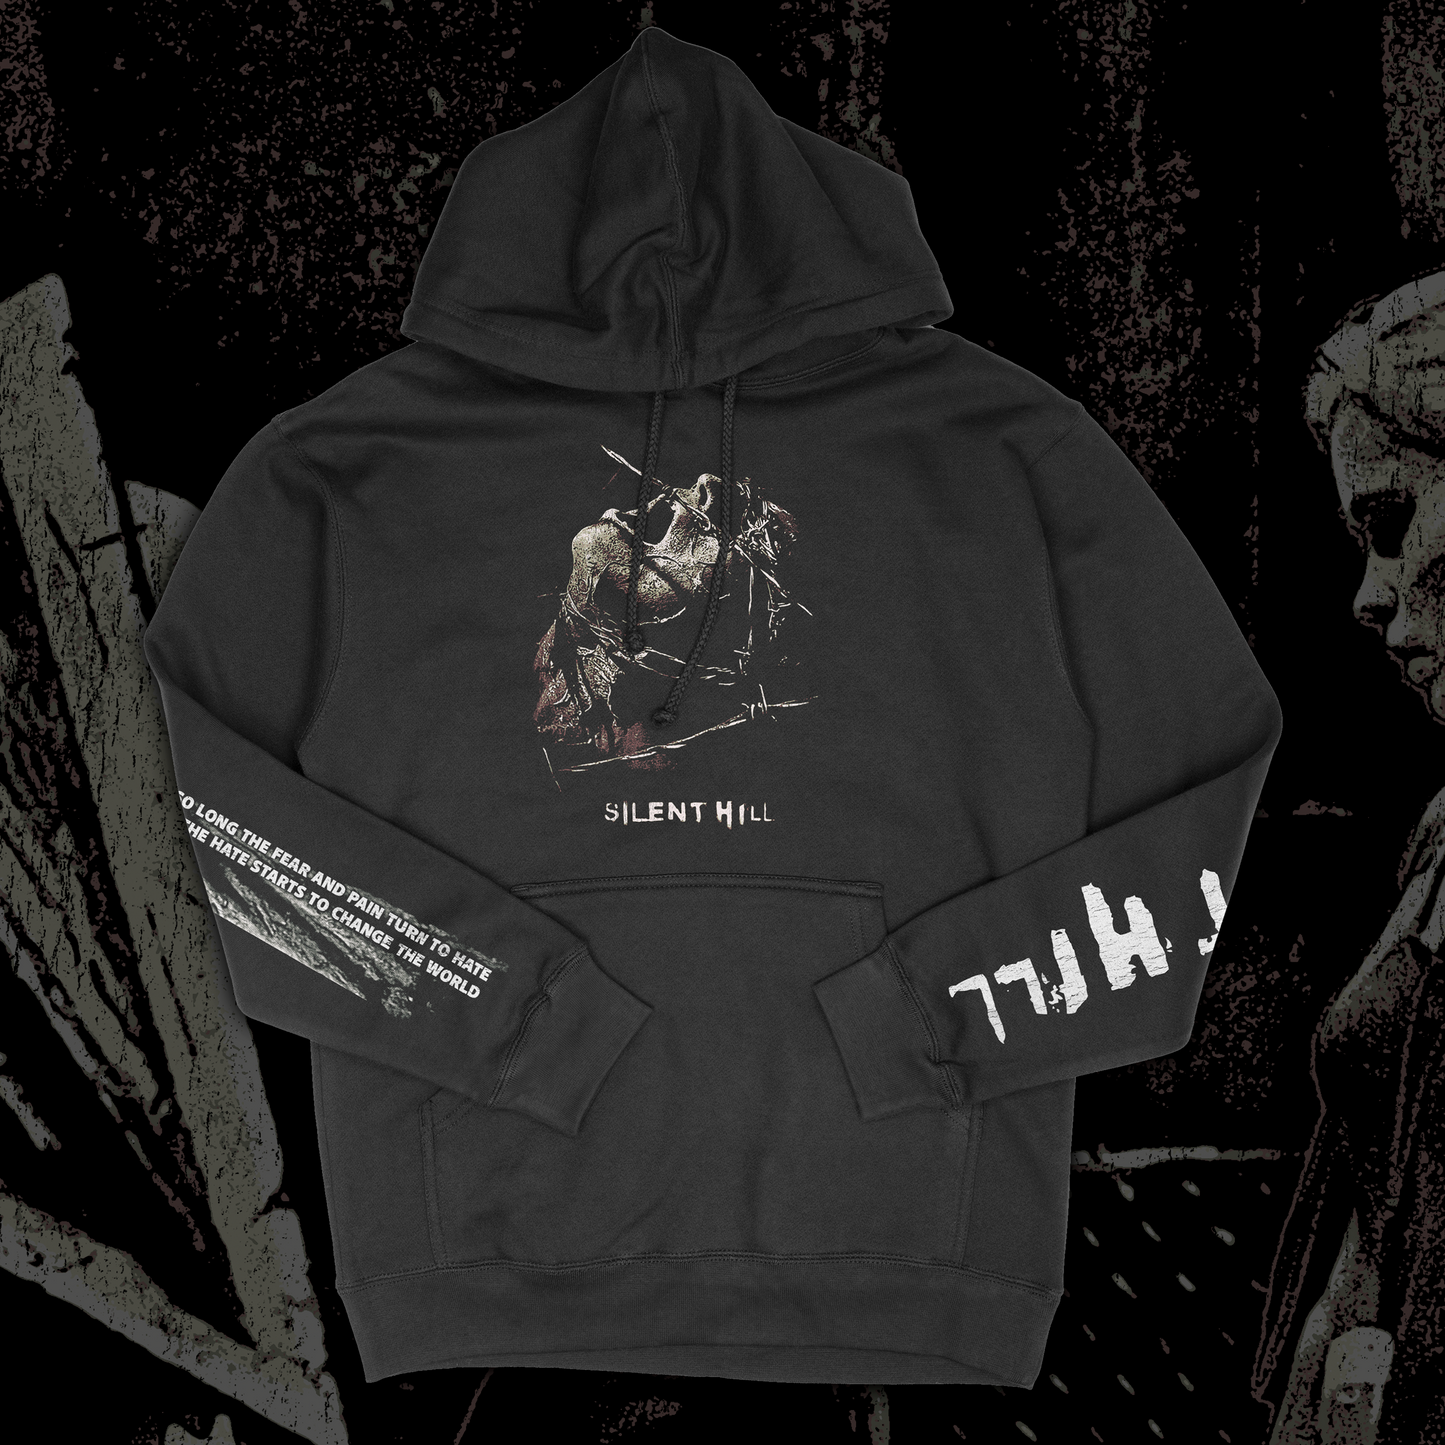 Silent Hill - Hate Changes the World - Oversized Hoodie